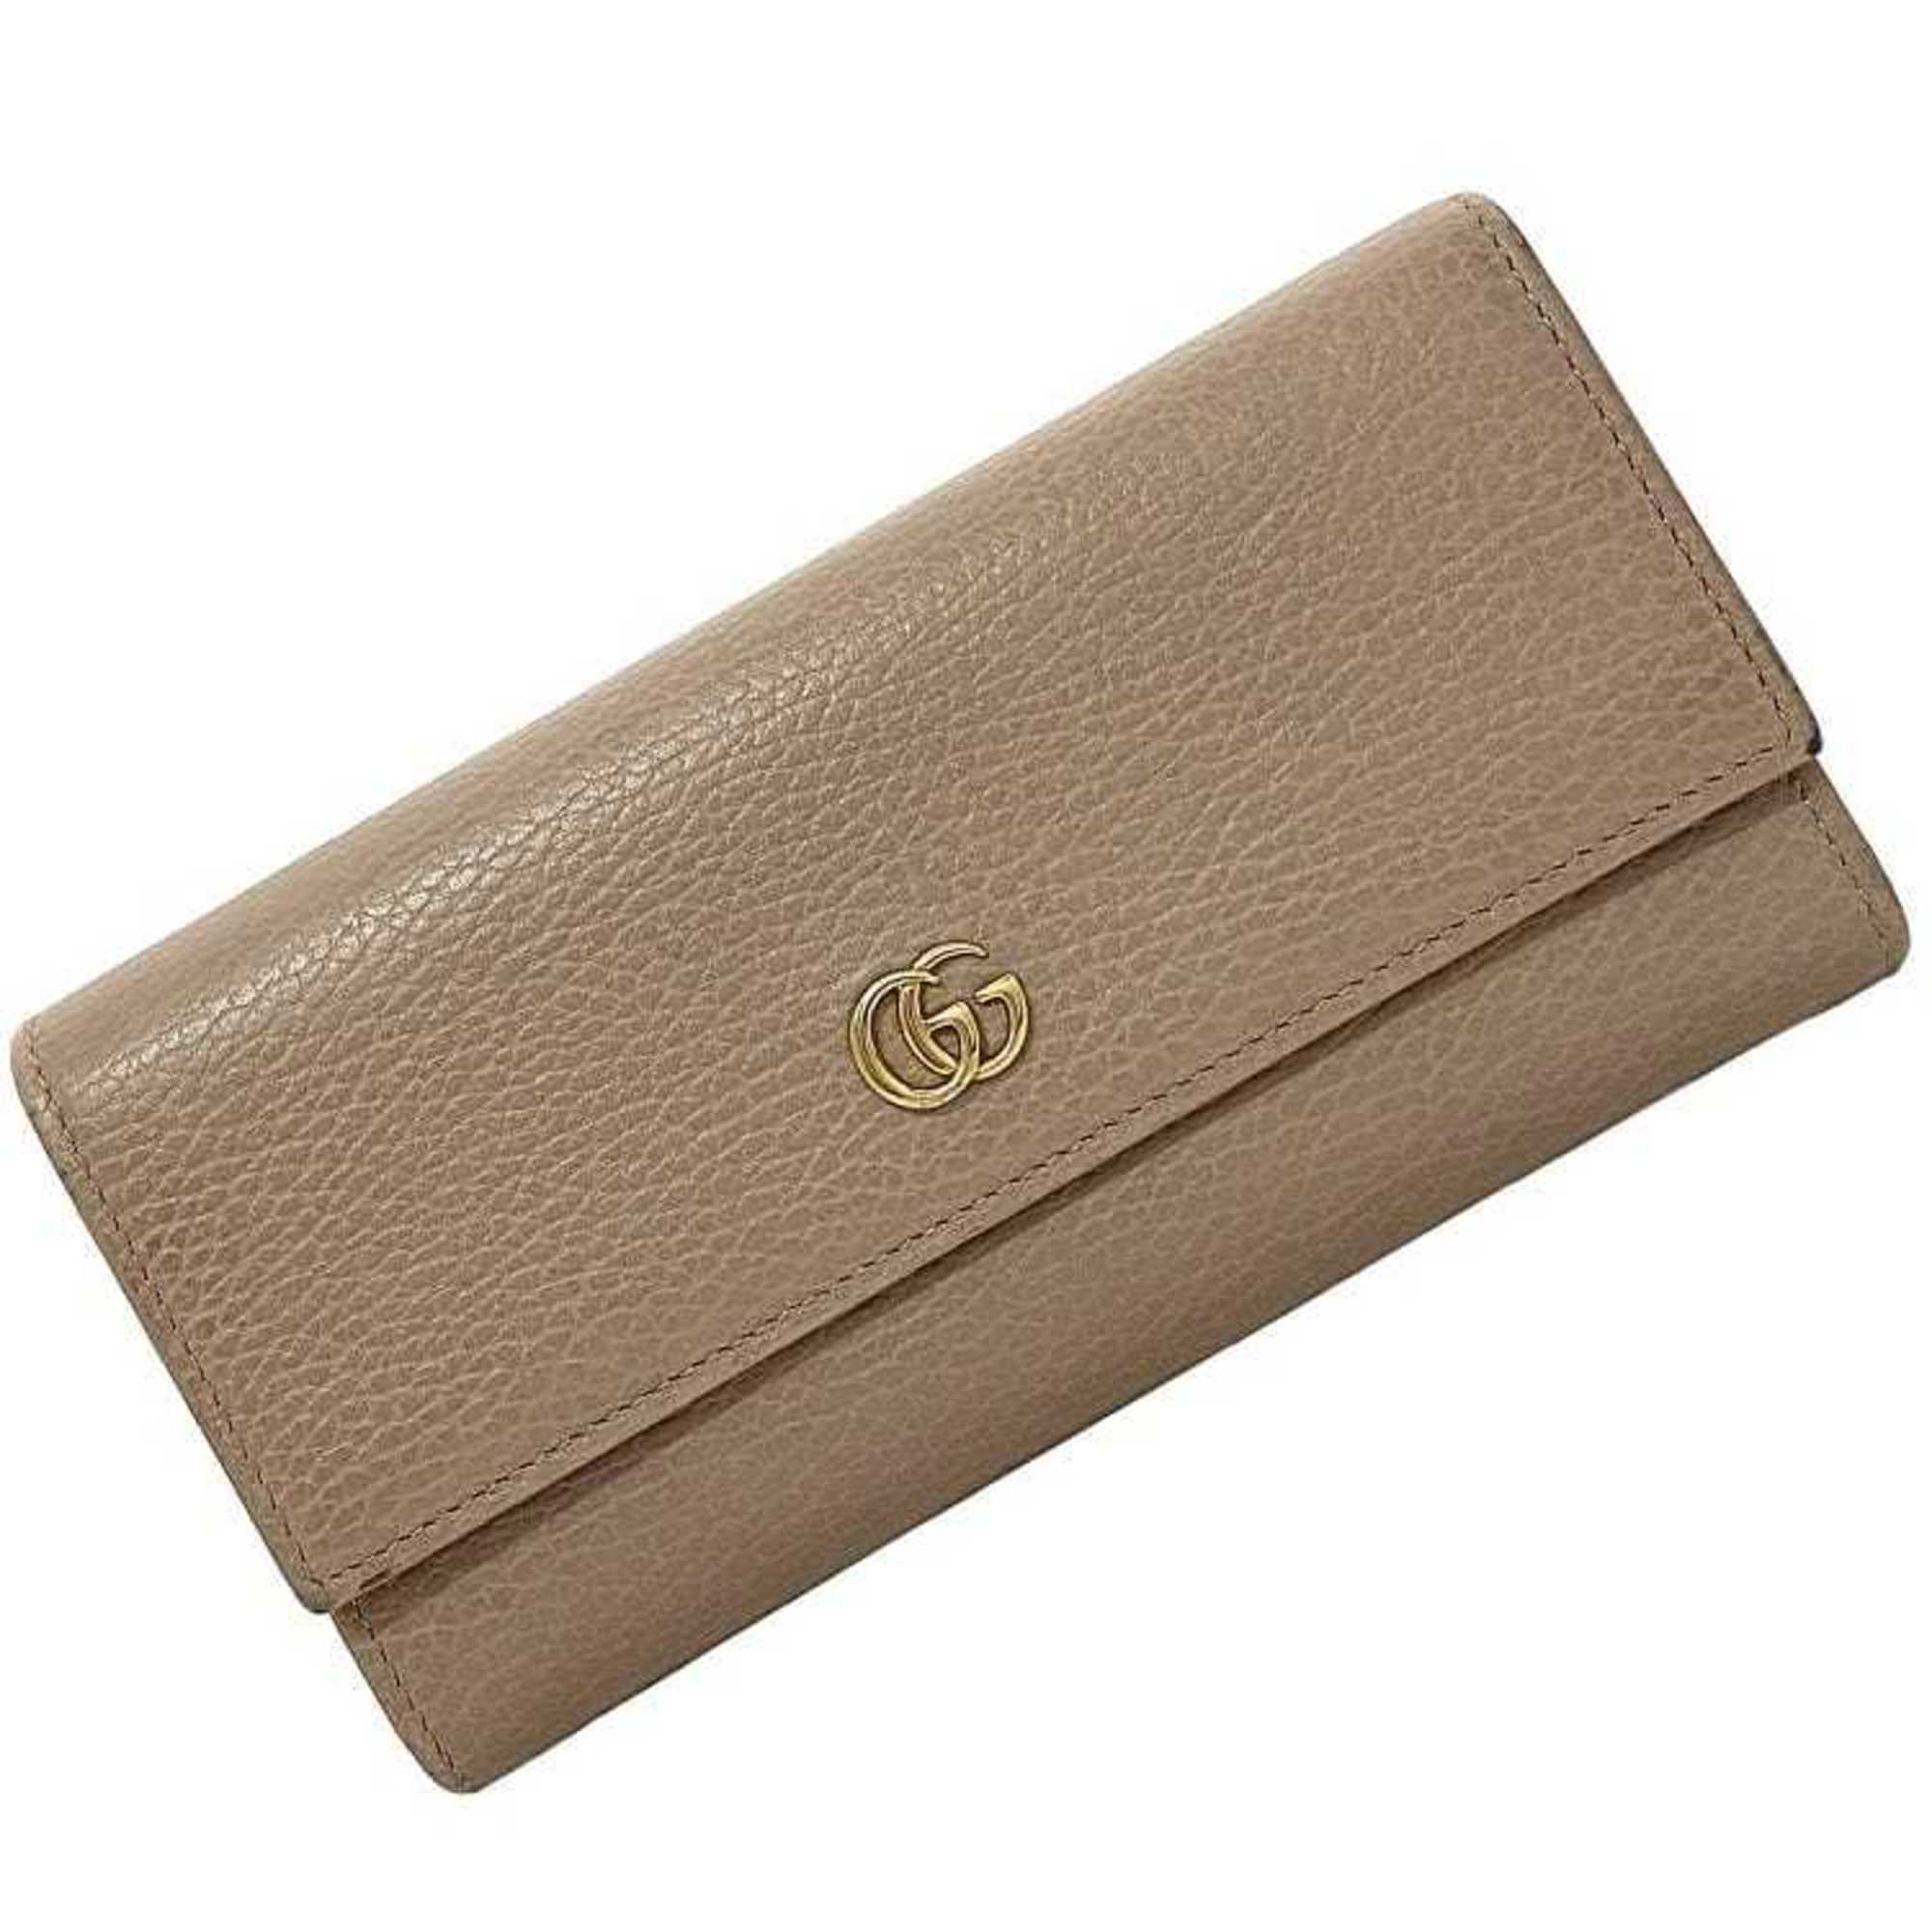 Gucci Folio Long Wallet Pink Beige GG Marmont 456116 Purse Leather Metal GUCCI Petit Continental Grained